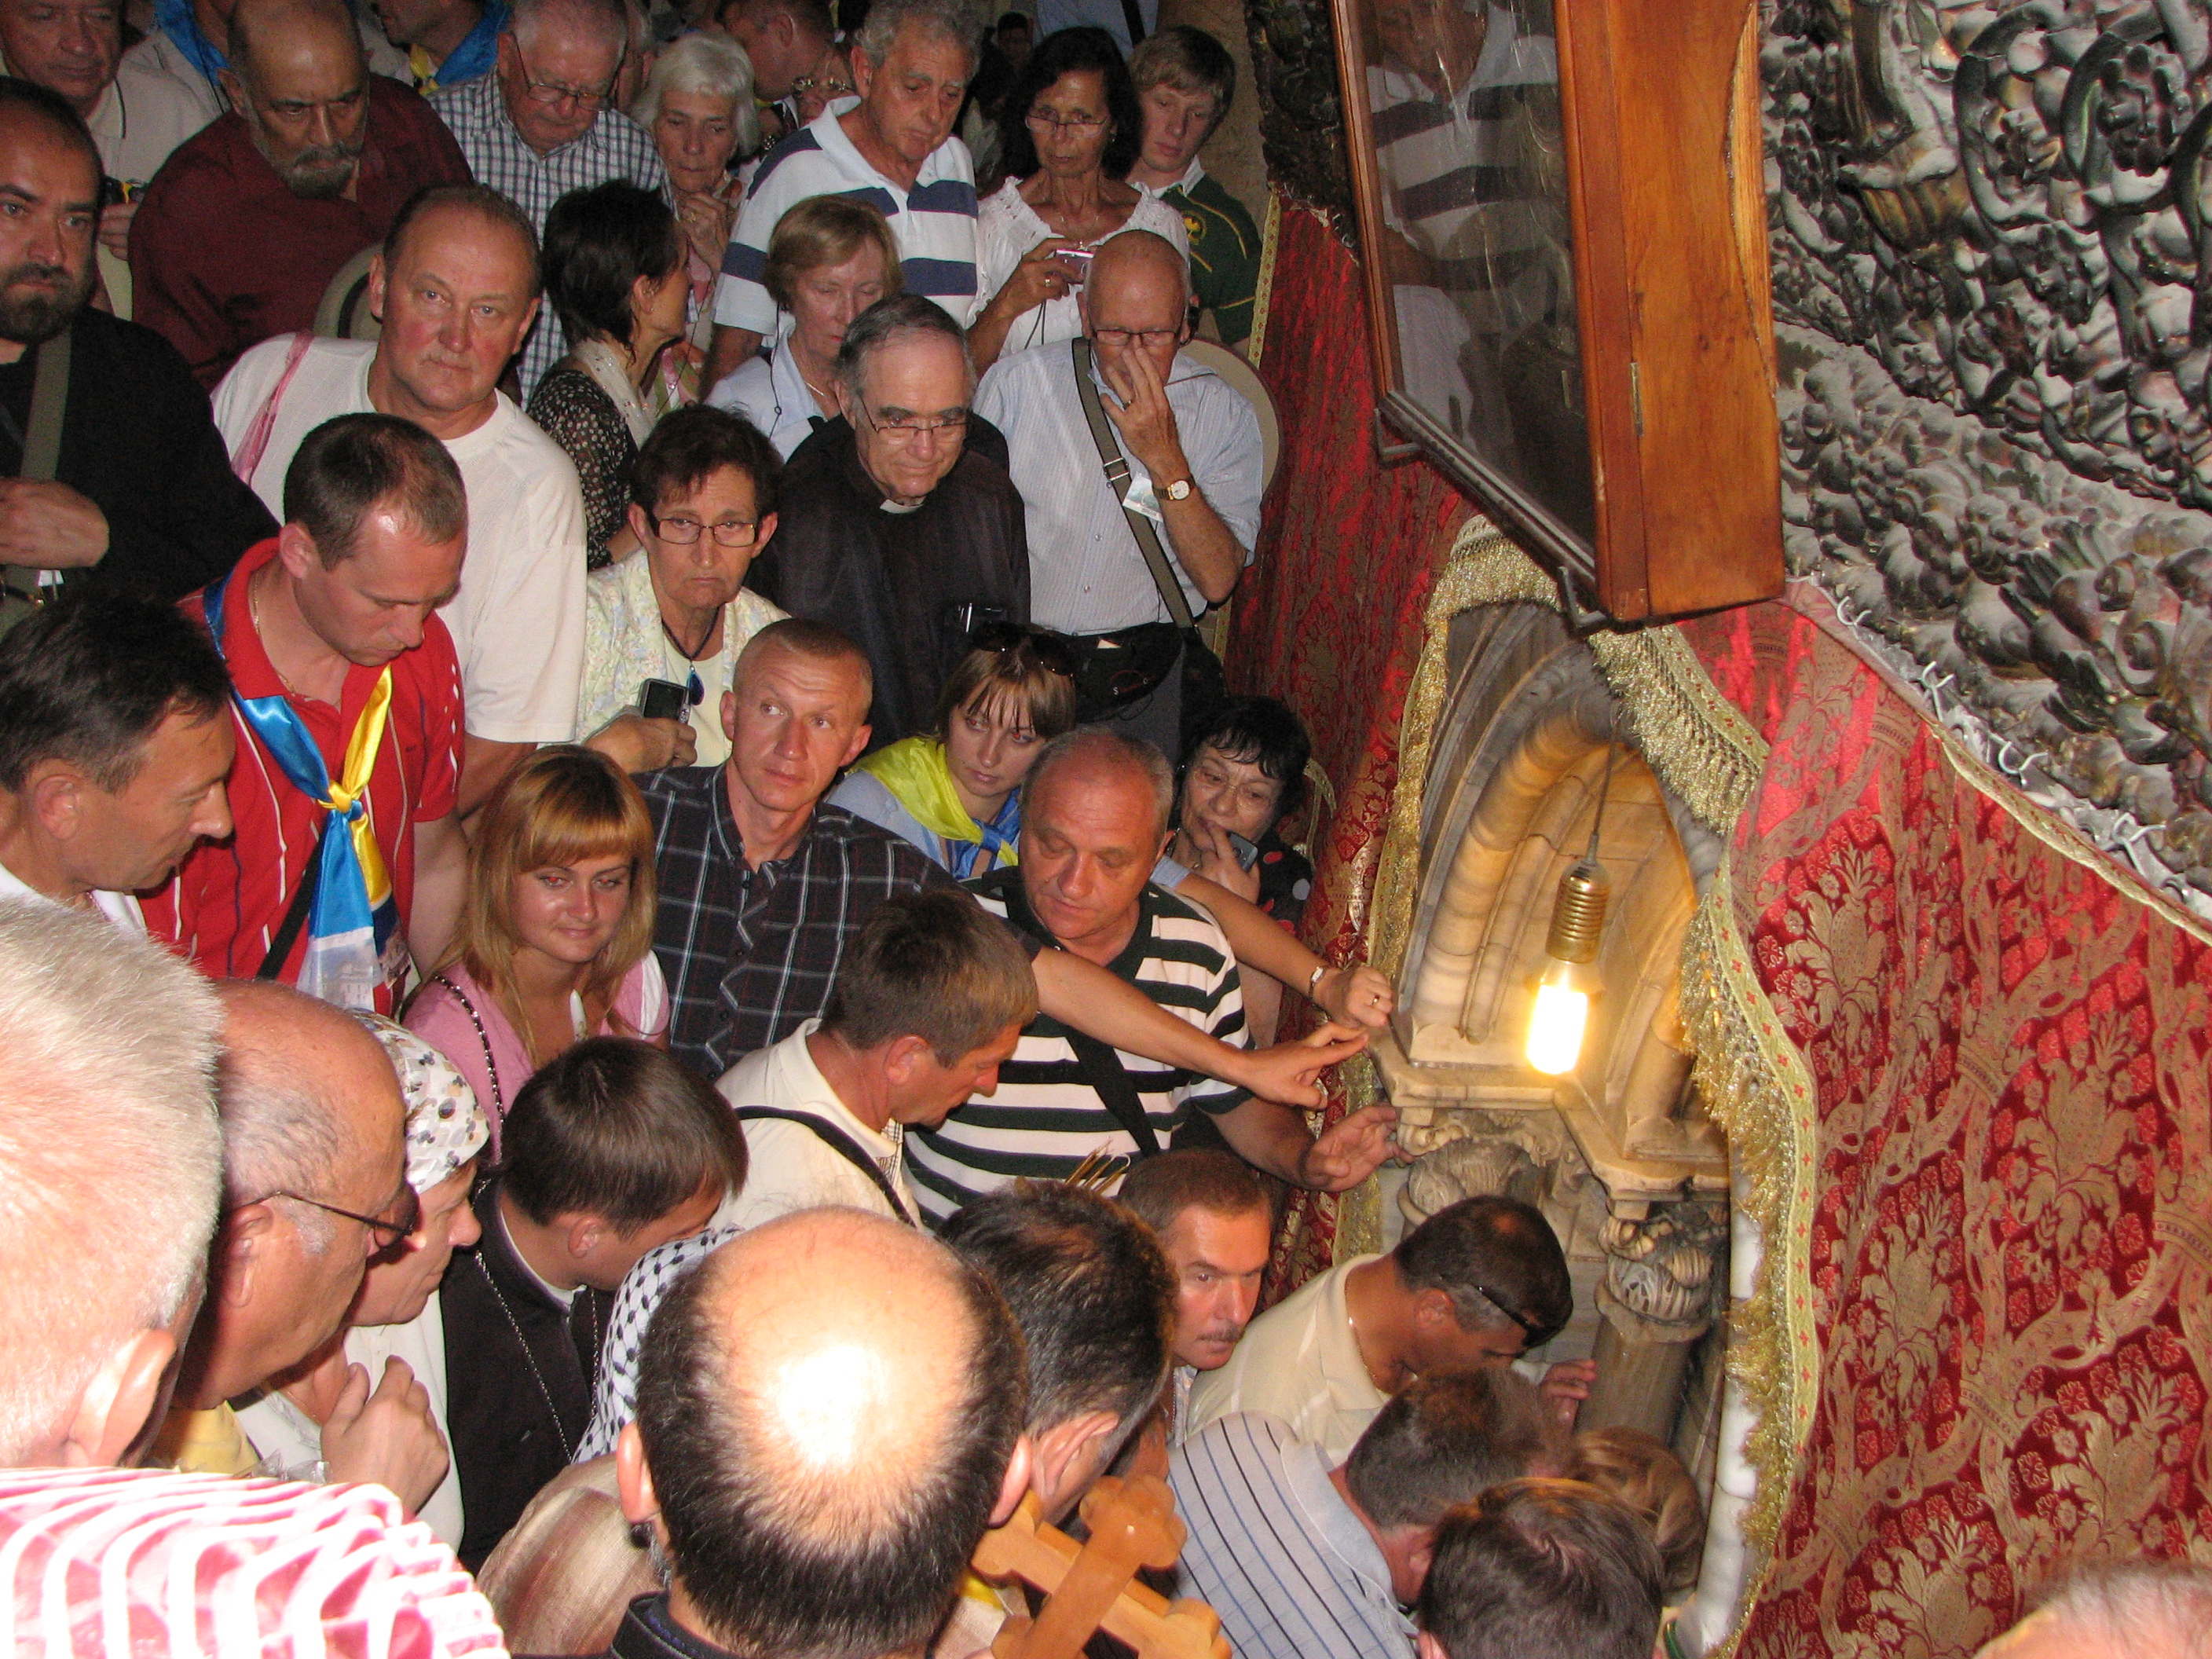 Pilgrims in the Church of Nativity, Bethlehem, Palestinian Territories, picture 3.